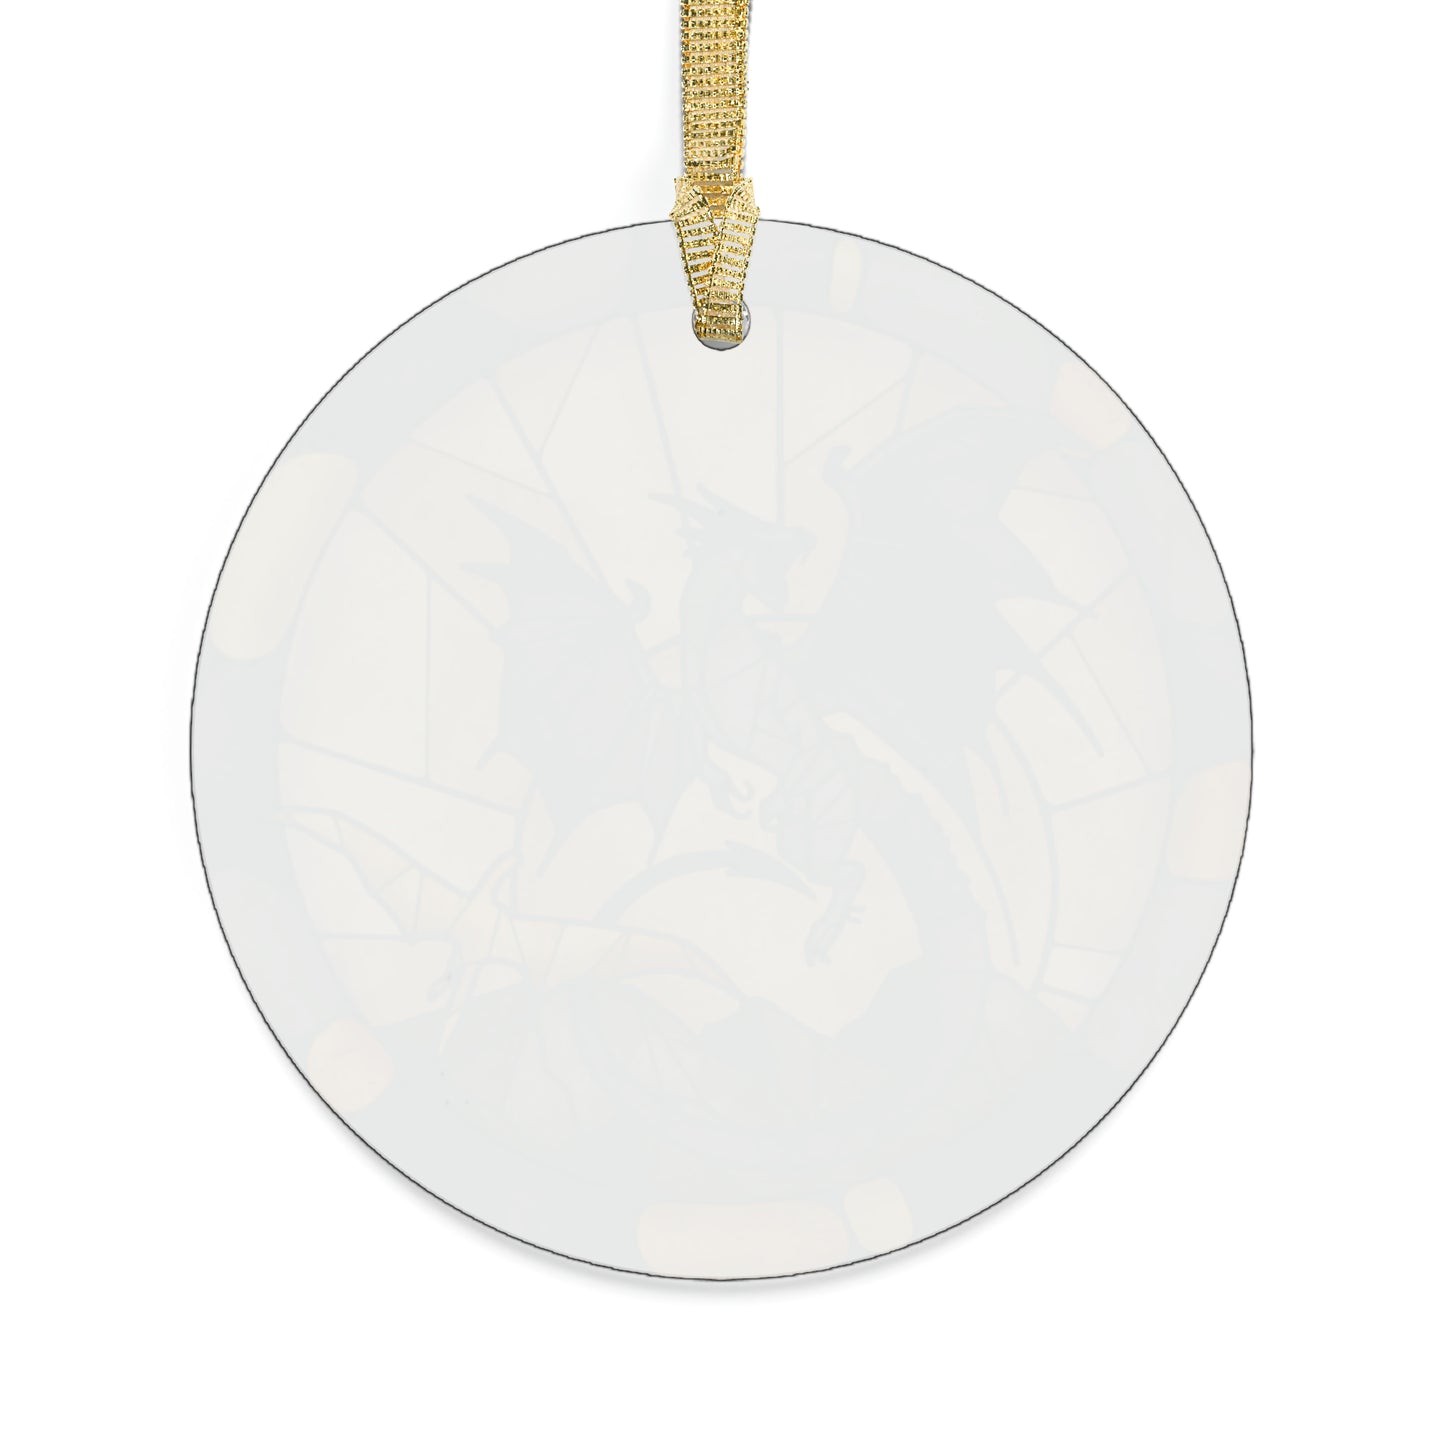 Fourth Wing - Clear Acrylic Christmas Tree Ornament